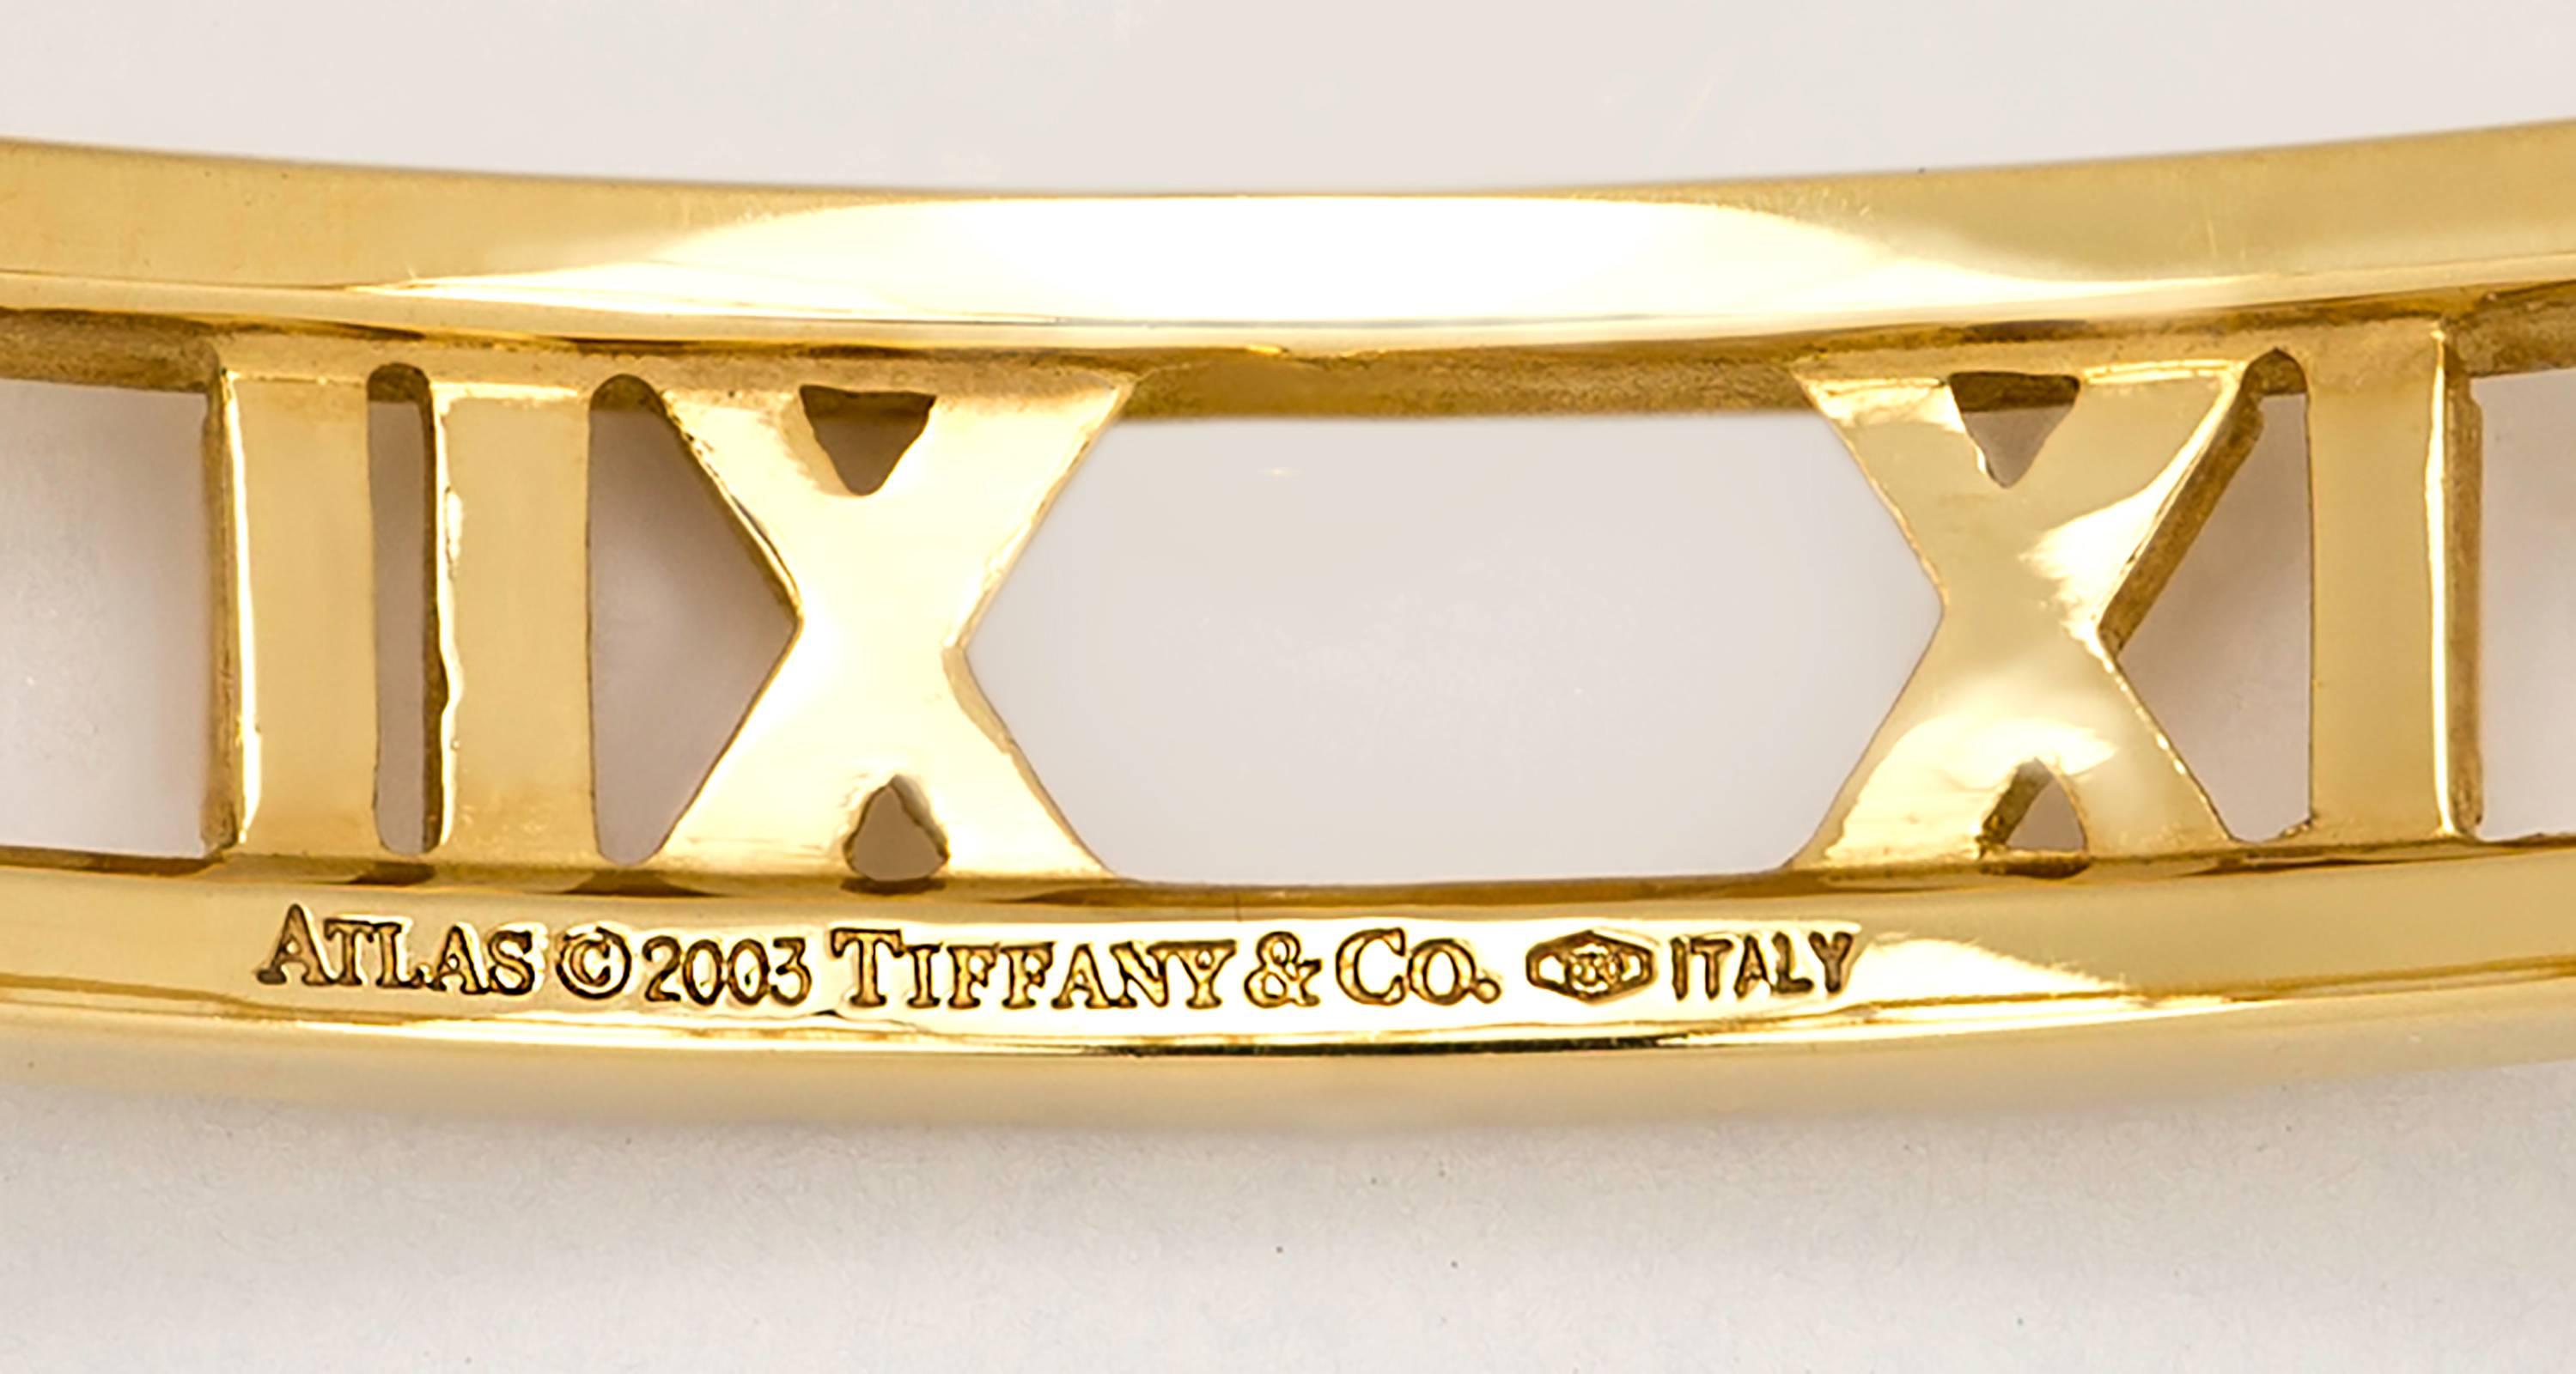 Lovely Tiffany and Co 18k yellow gold Atlas  bracelet.  Pierced  bangle style. Total weight 33.3g. Excellent condition.
Hallmarks:  stamped  Atlas 2003 Tiffany &  Co 750 Italy